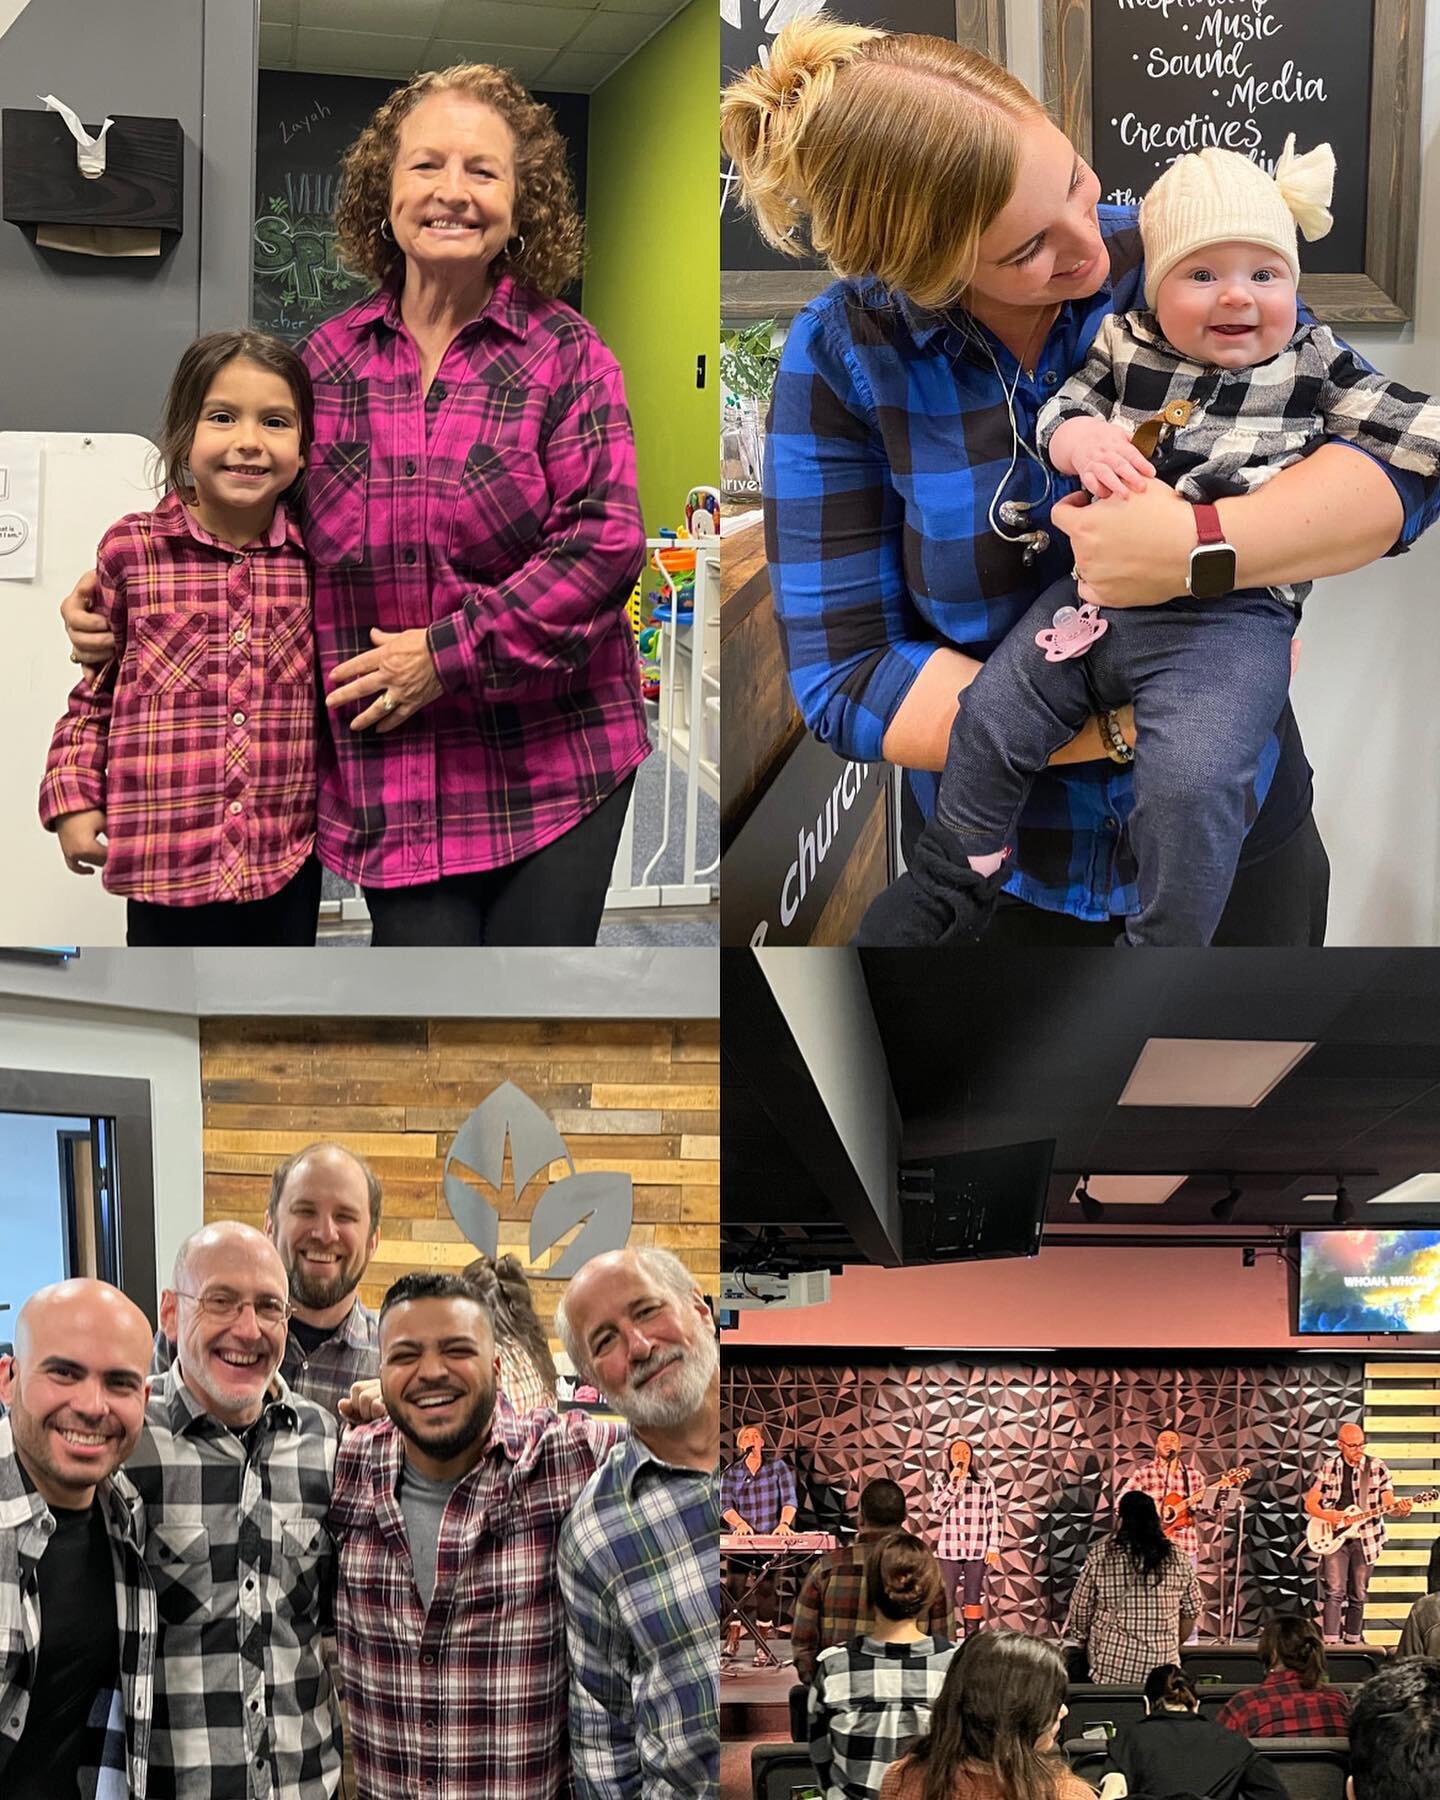 &ldquo;You belong in God&rsquo;s household with every other Christian.&rdquo; Ephesians 2:19b
.
.
.
Whether or not you wore a flannel to church yesterday, you belong here!  We love finding fun ways to make you feel a part of the church family, becaus